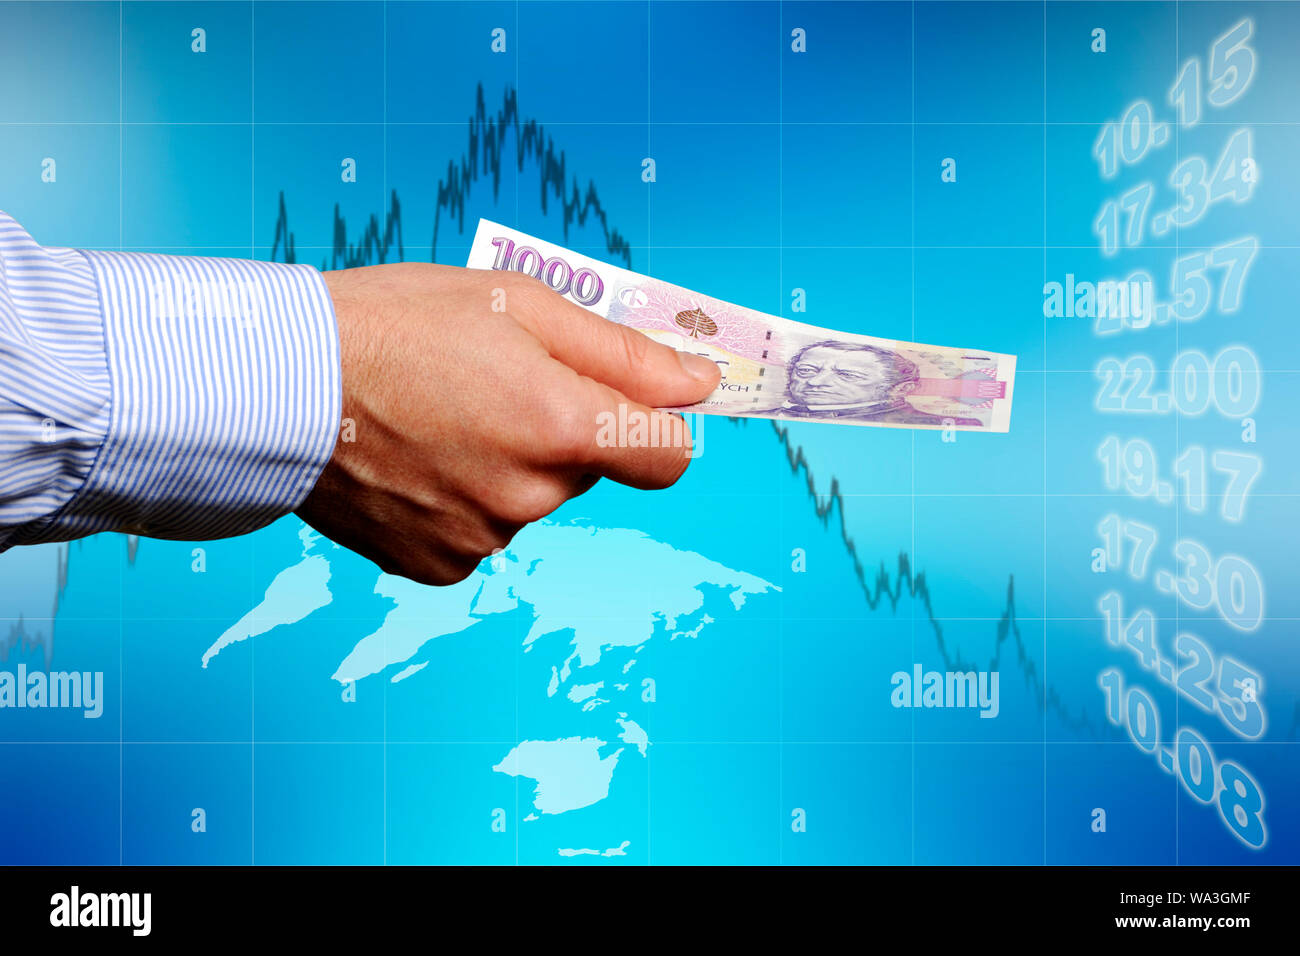 man holding a one thousand Czech crown banknote and global markets indicators, investing concept Stock Photo